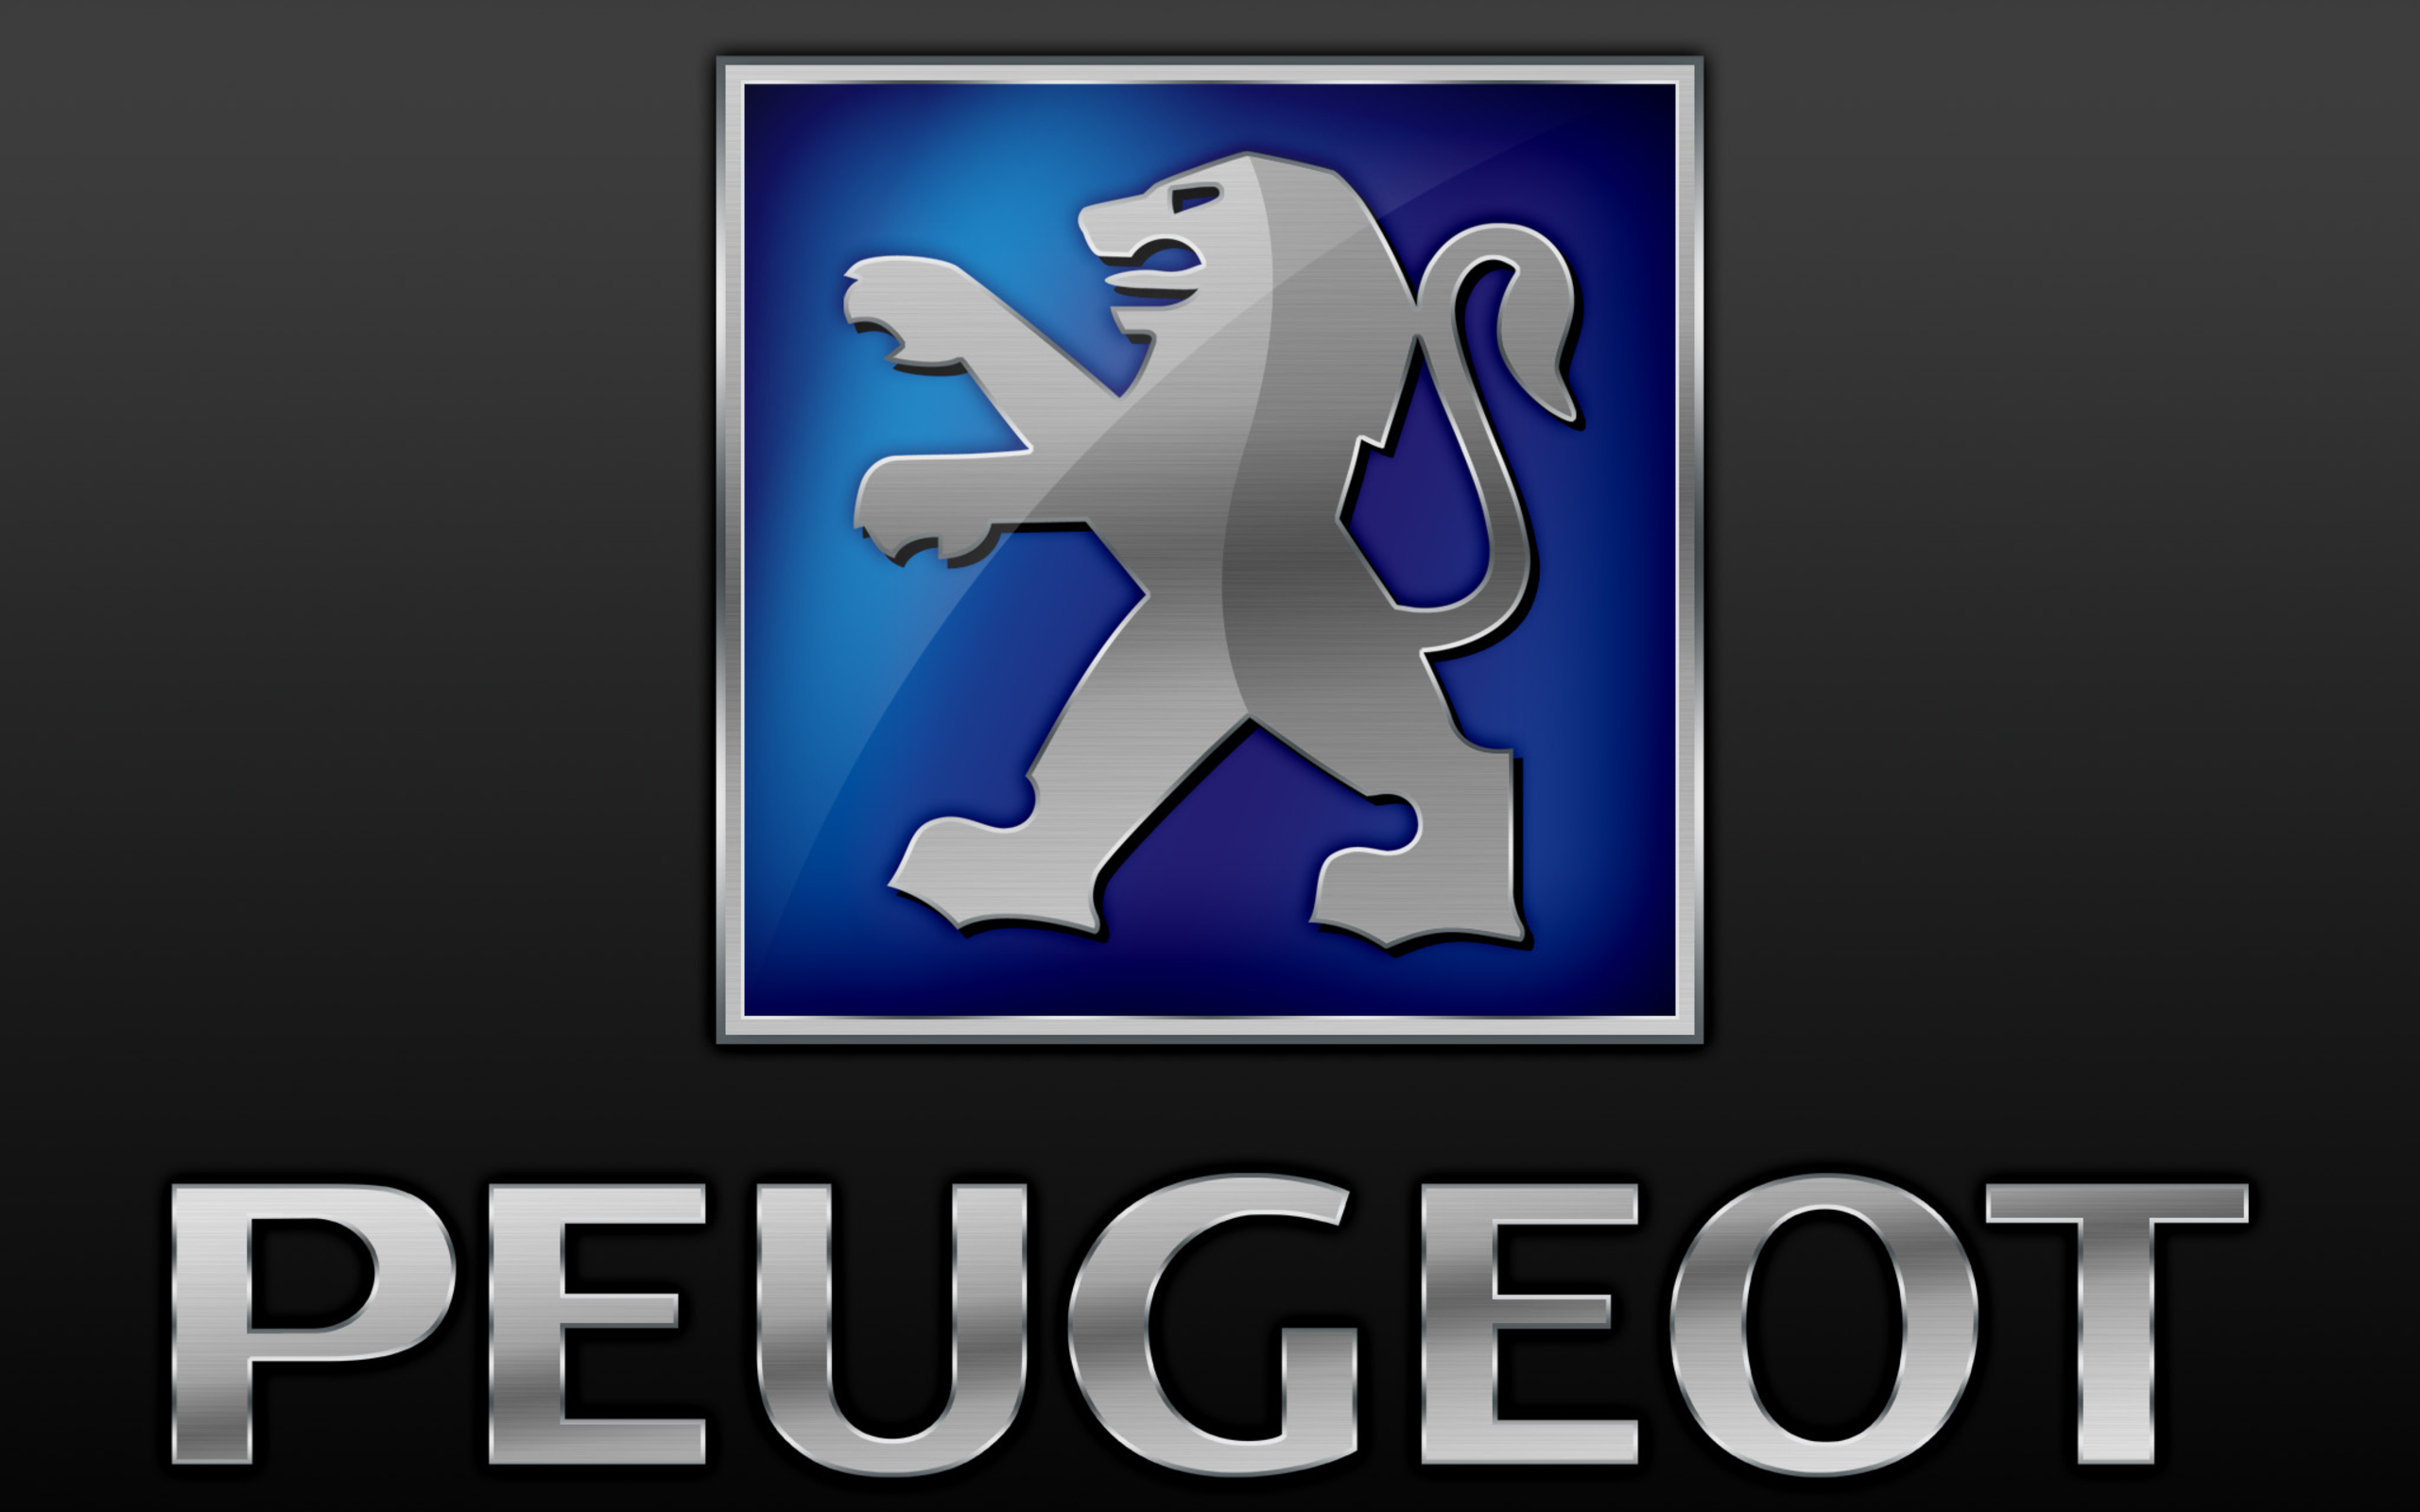 Peugeot Image Logo HD Wallpaper And Background Photos